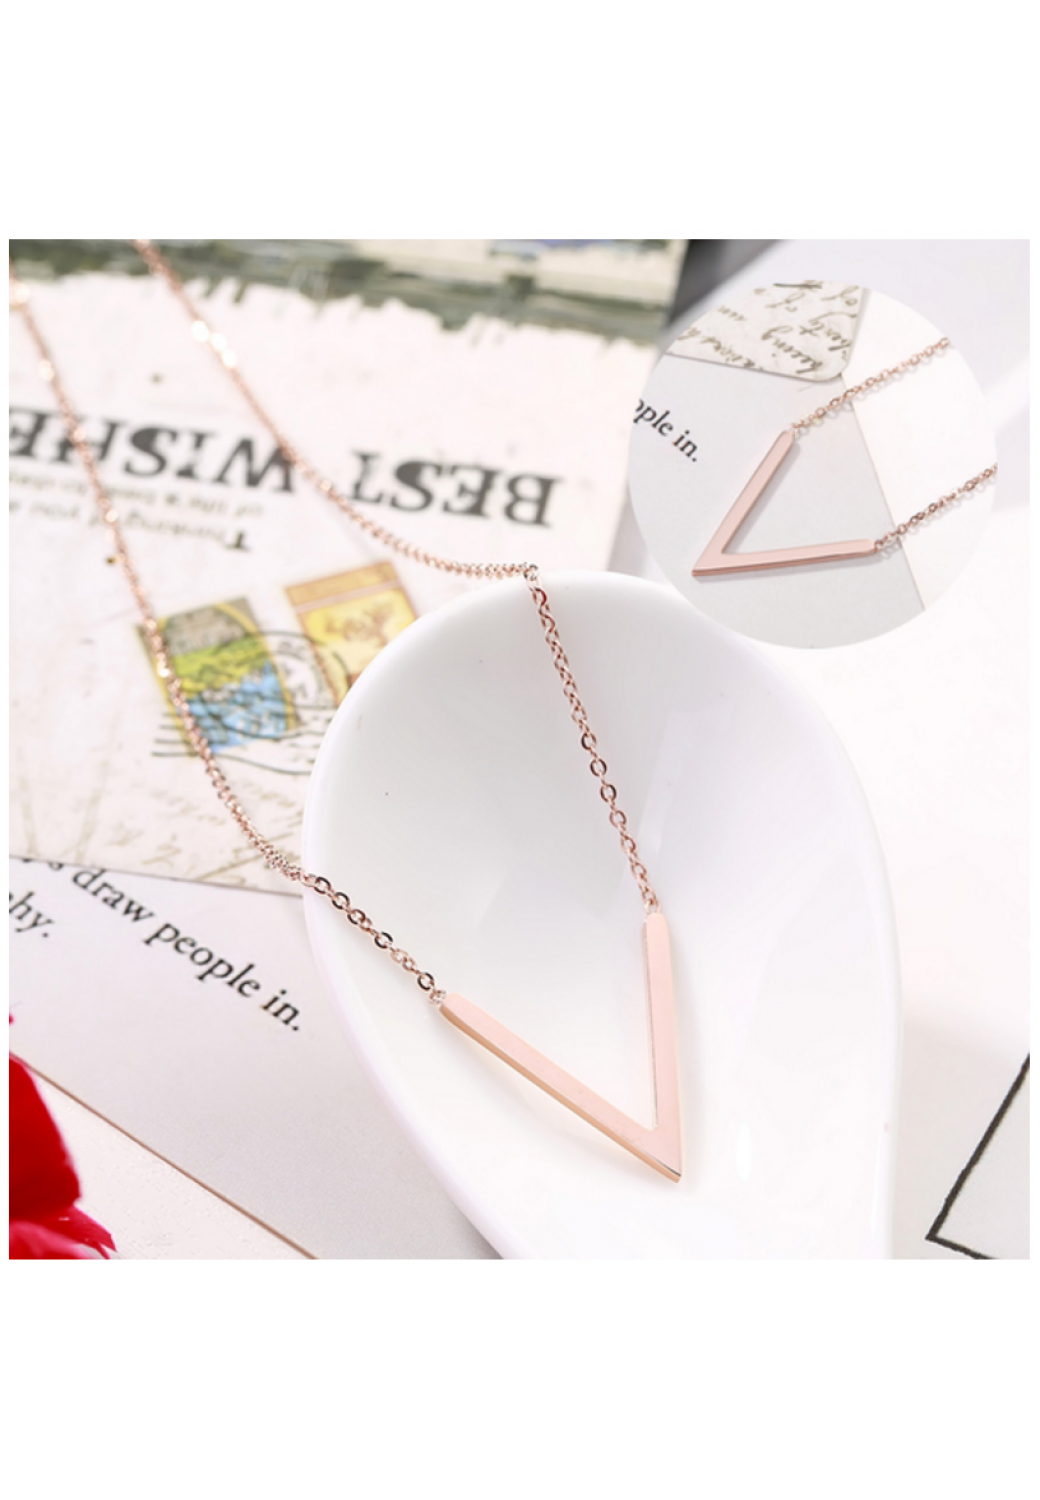 NECKLACE-16-ROSE GOLD